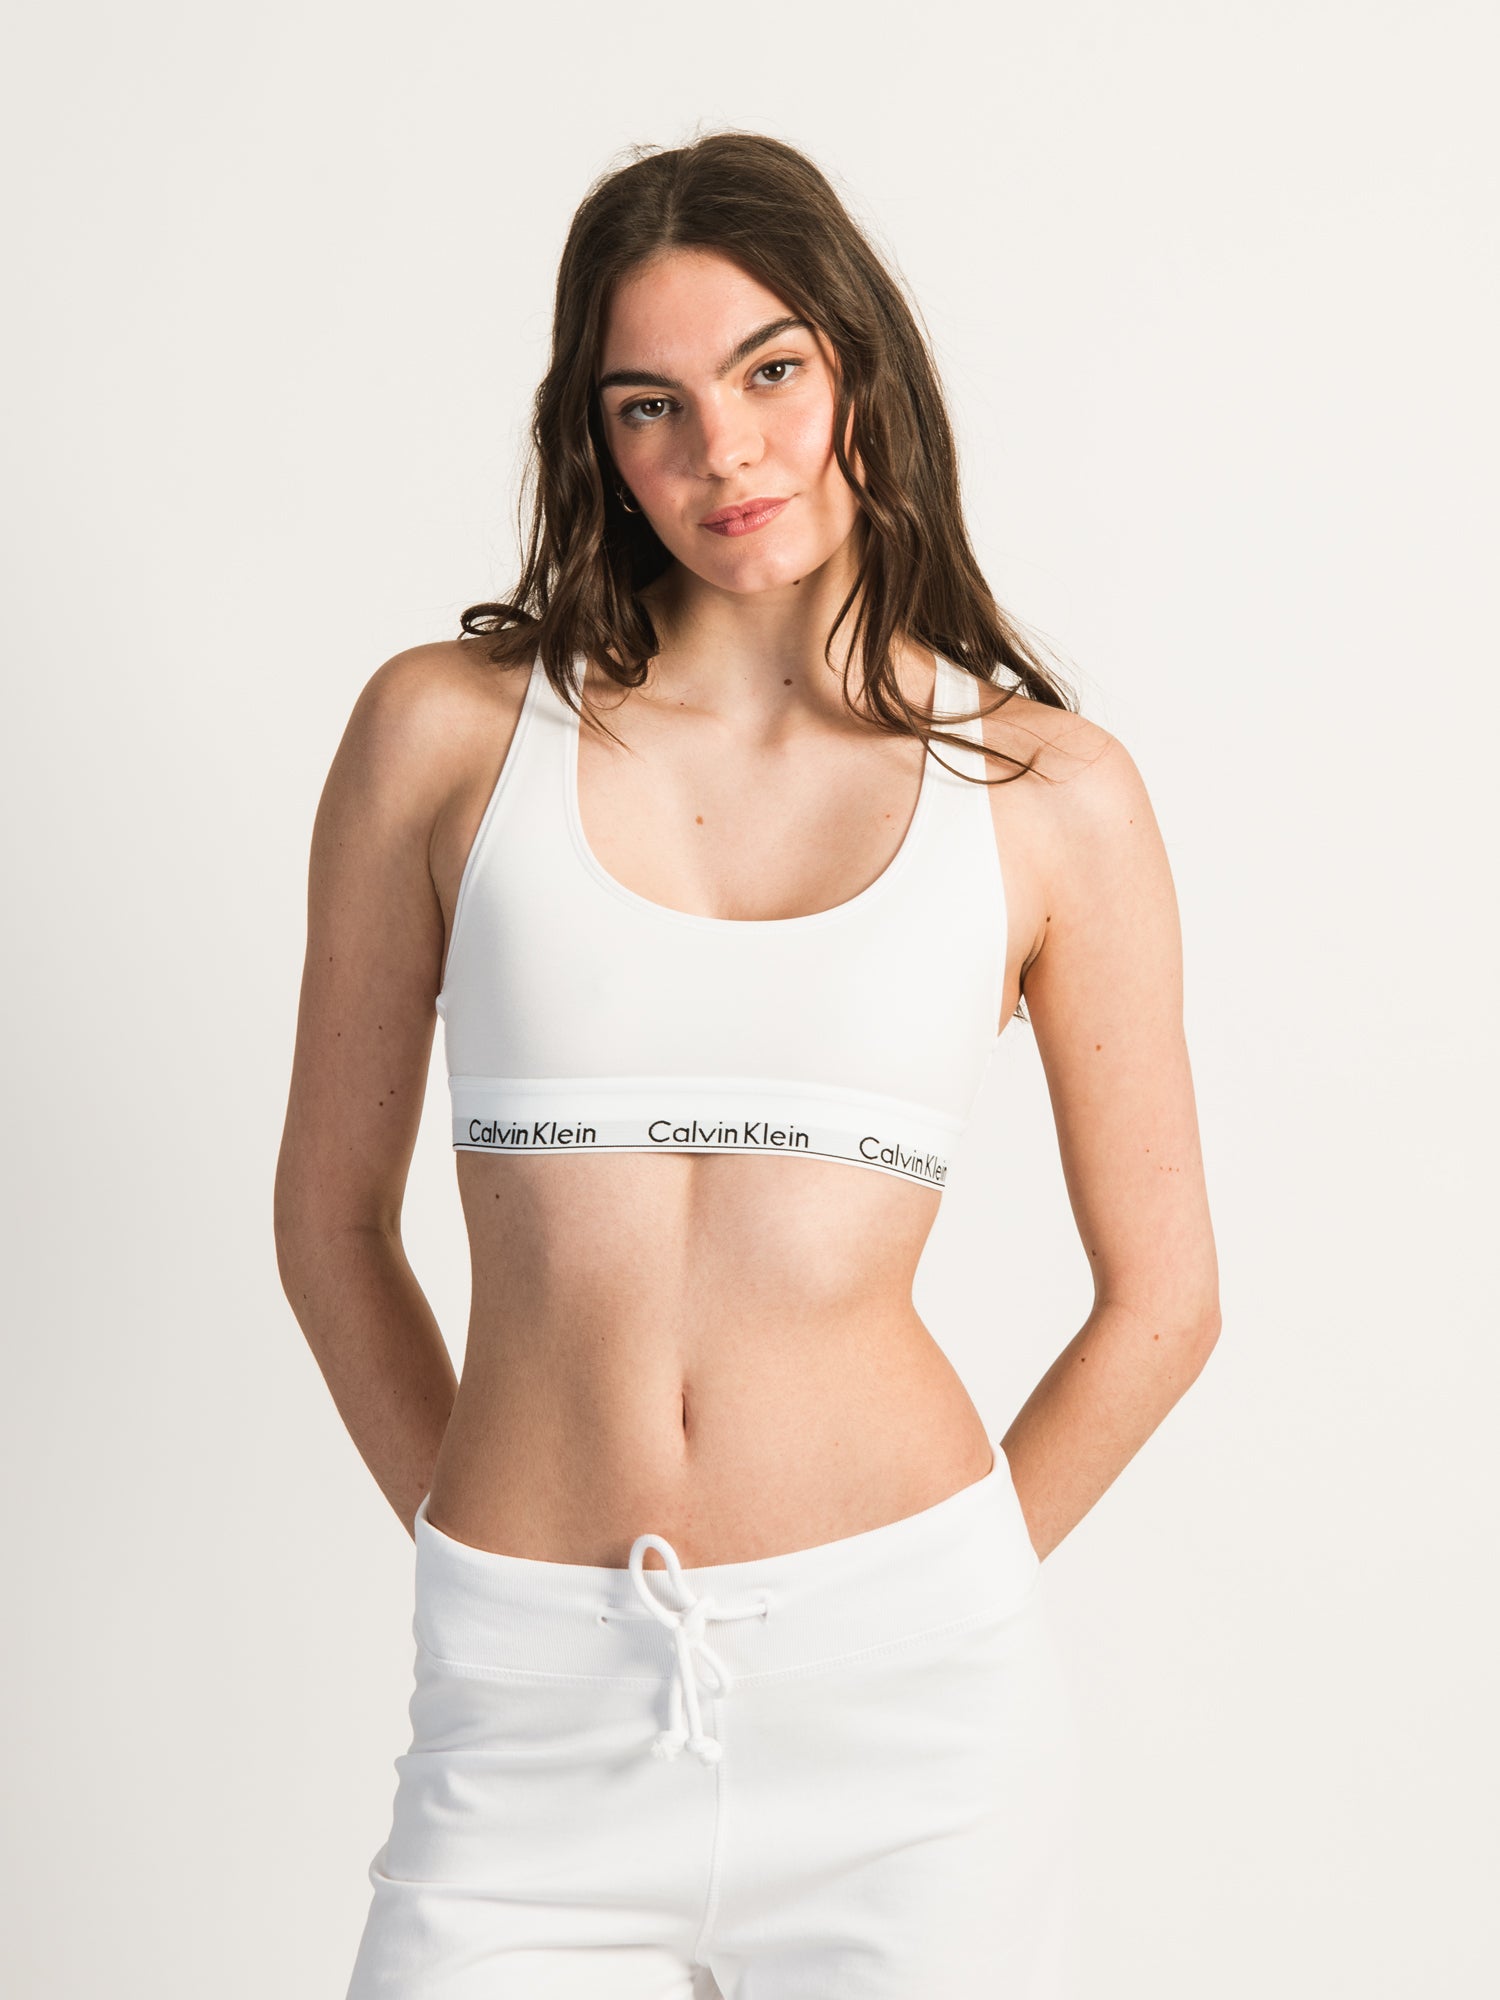 Calvin Klein - The Best Selection in Canada - Shop Now